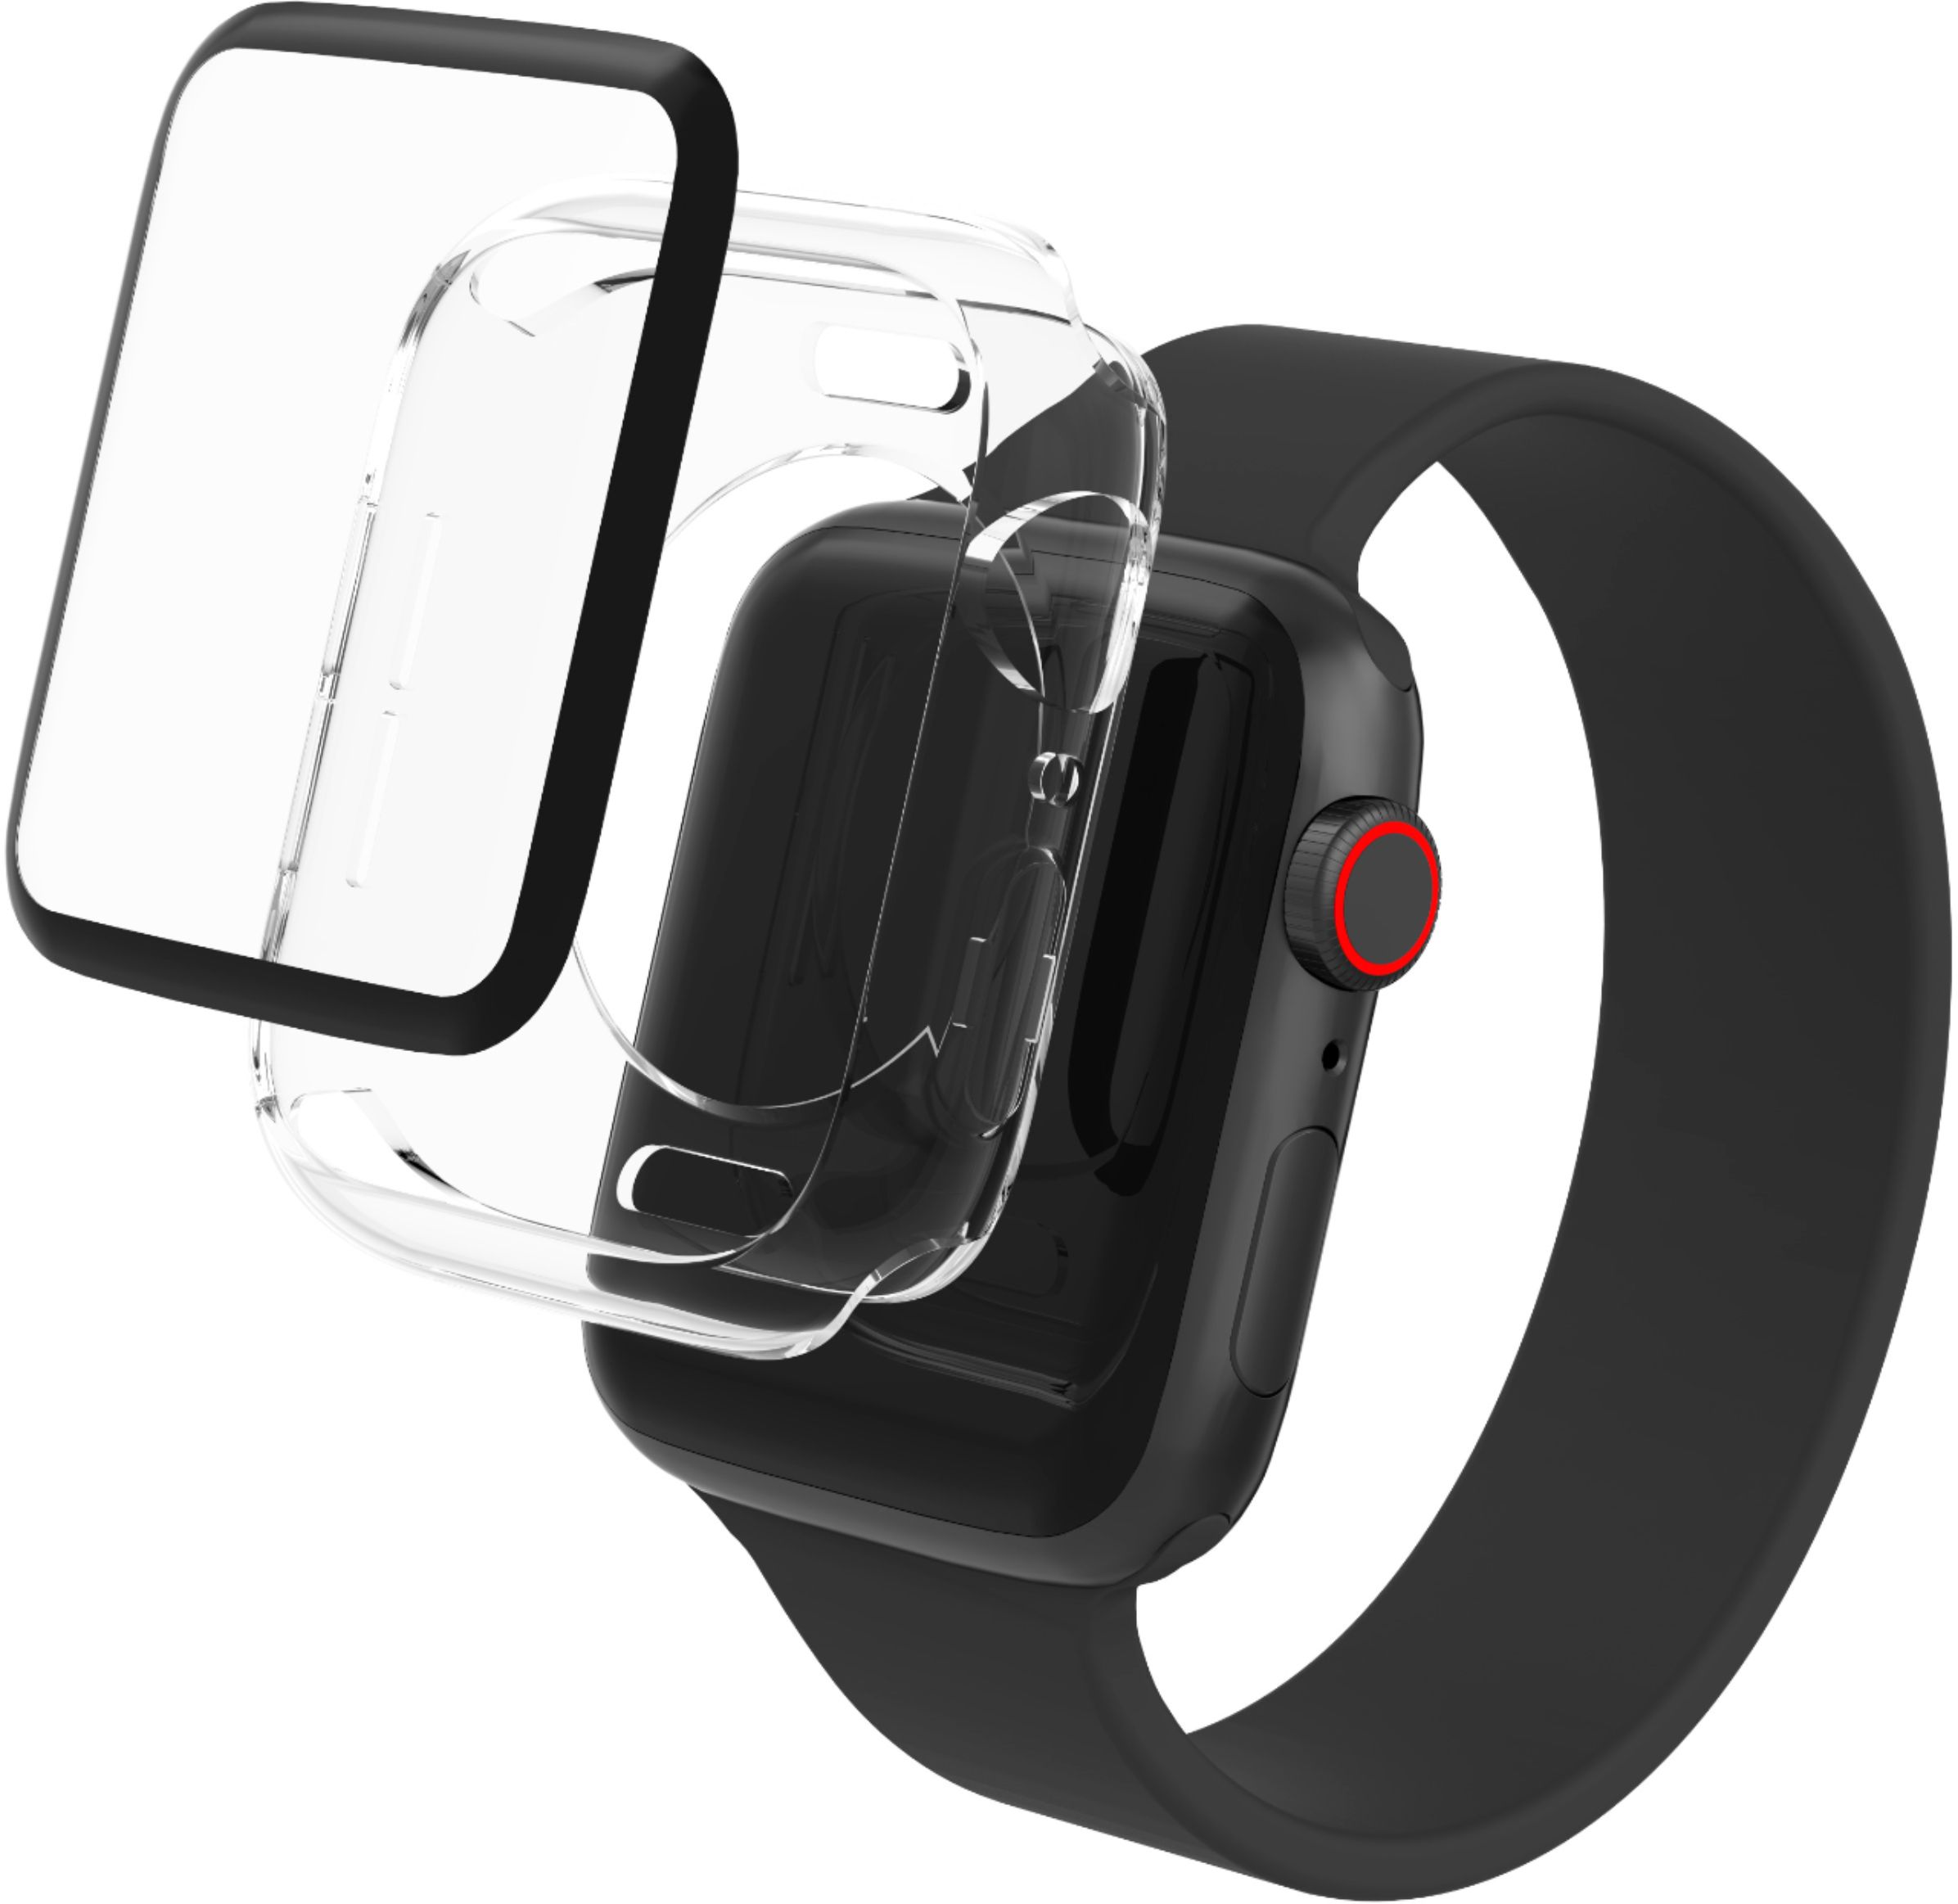 Angle View: ZAGG - InvisibleShield GlassFusion+ 360 Flexible Hybrid Screen Protector + Bumper for Apple Watch Series 4/5/SE/6 44mm - Clear